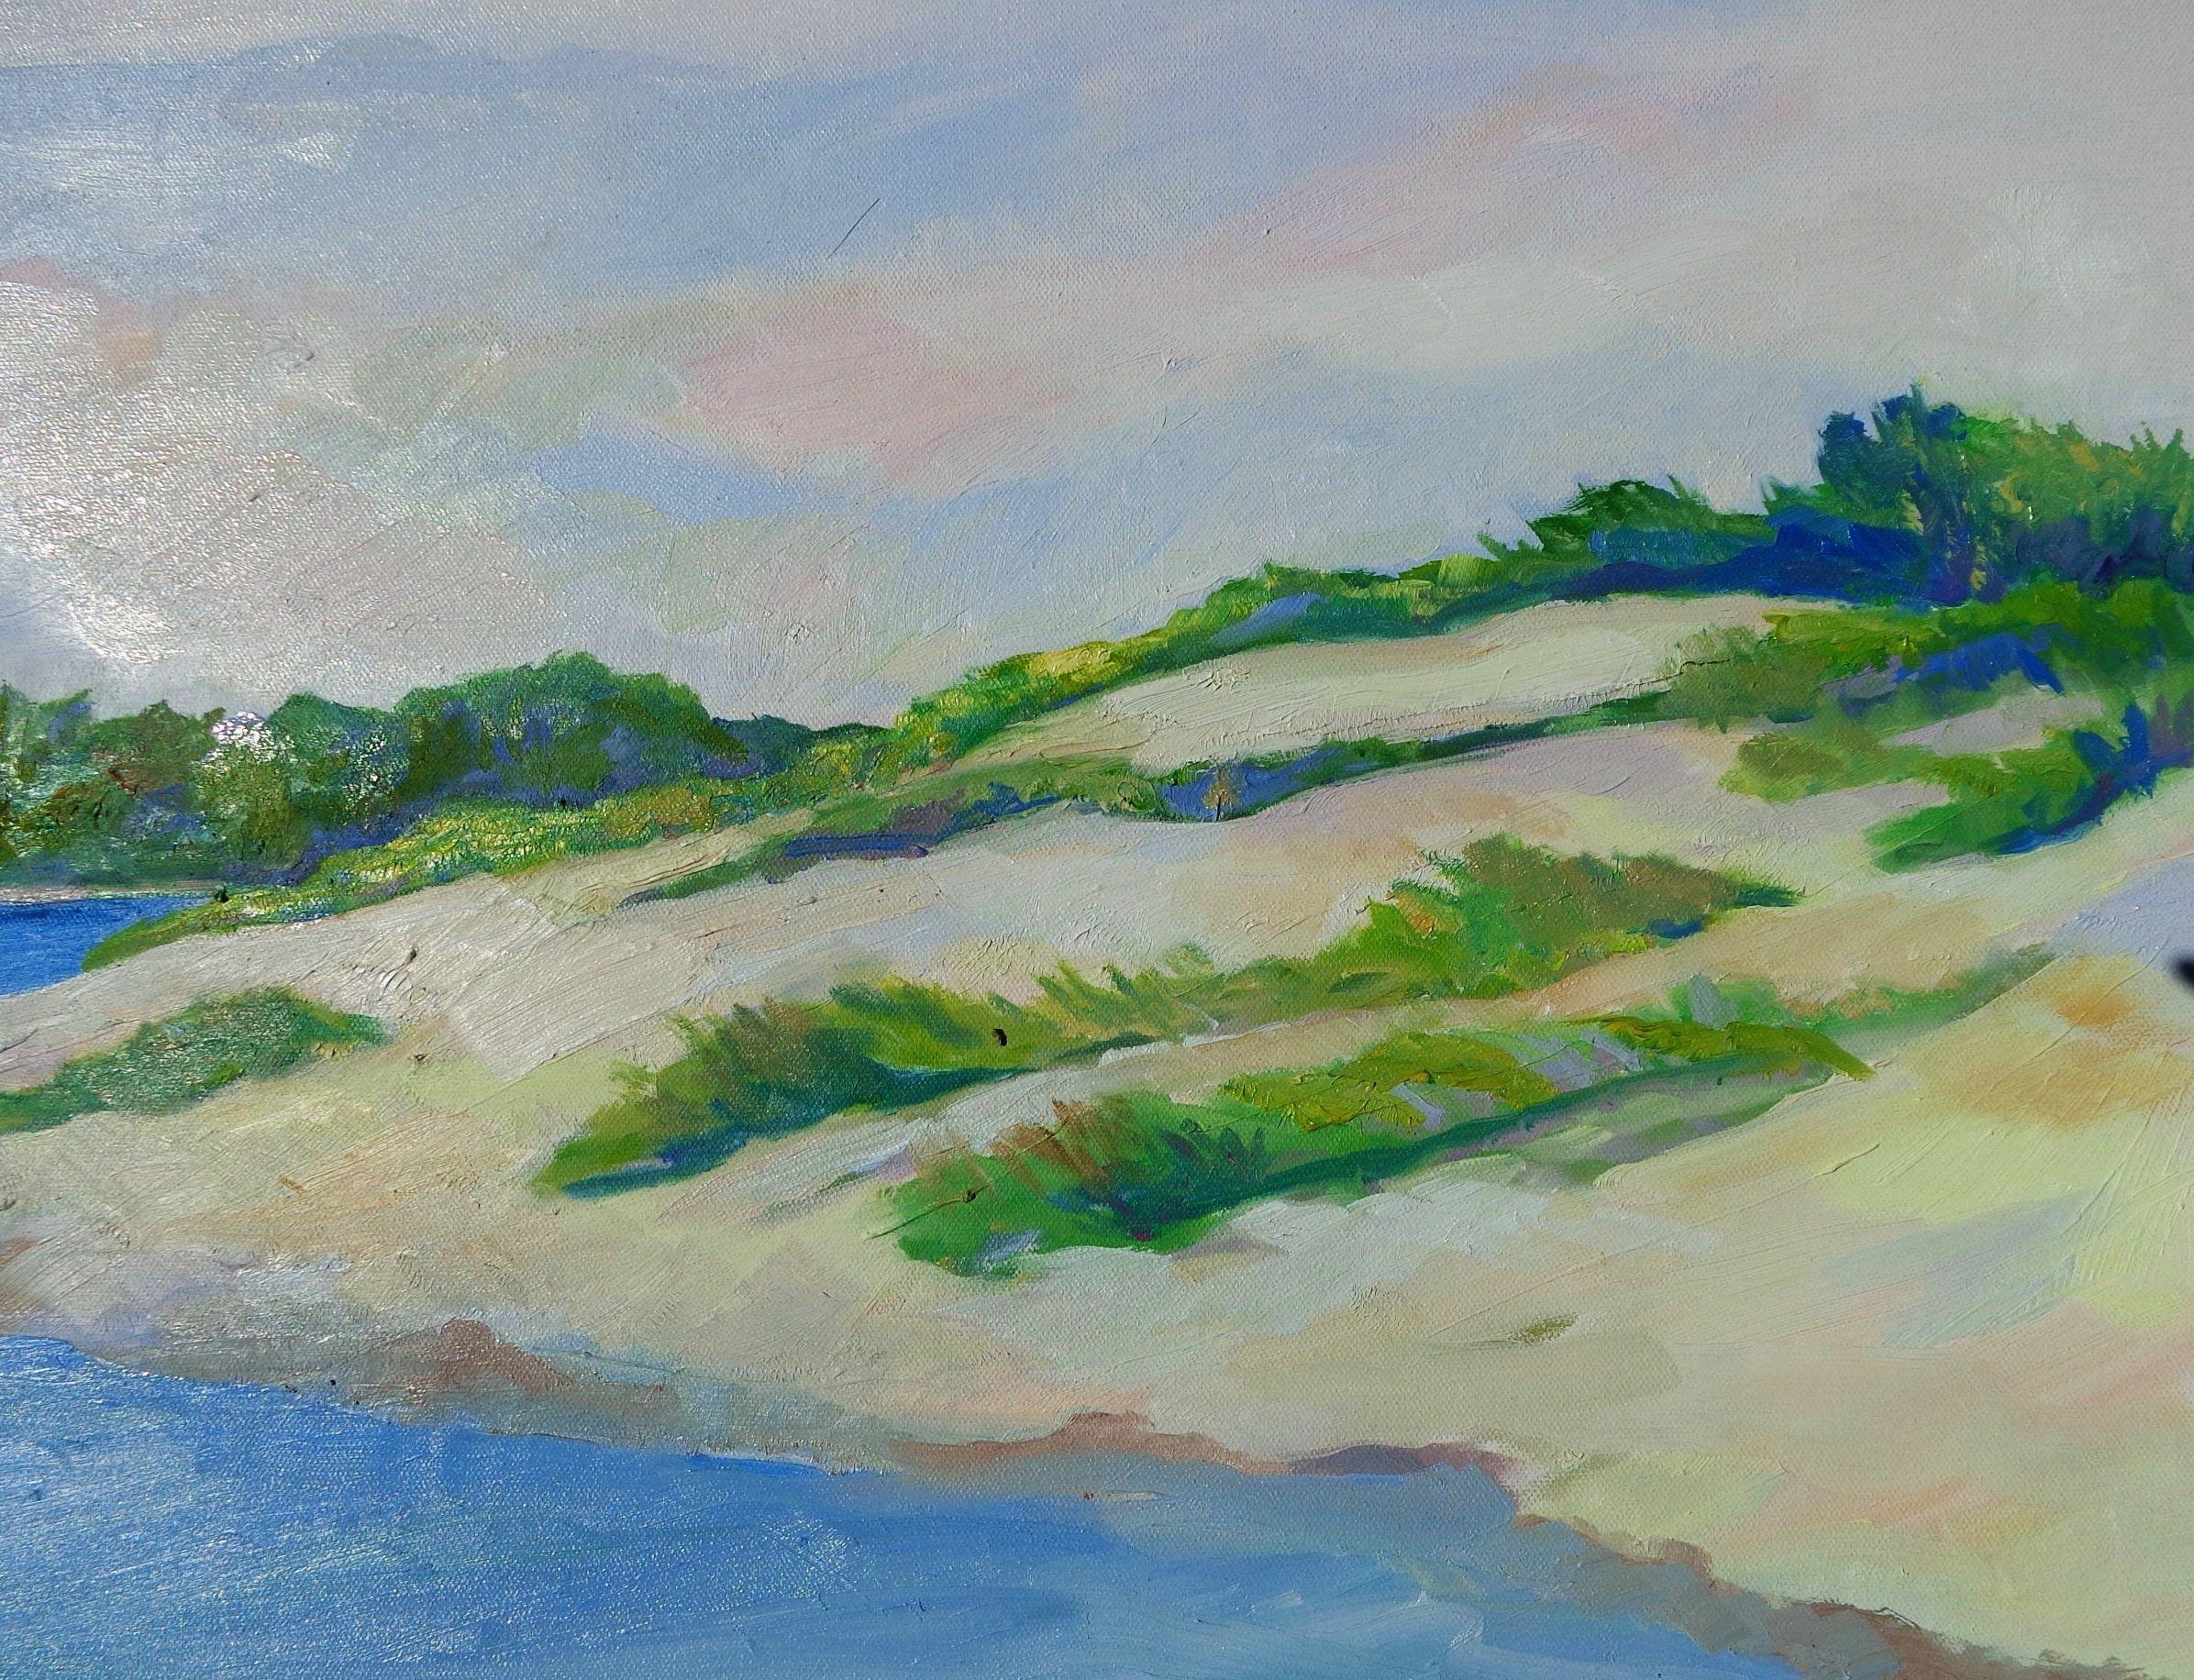 Summer in Maine and it's glorious colors and light- these are the qualities I worked  to convey in Riverside Dunes.    The Ogunquit River is a 9.8-mile-long tidal river that flows to the Atlantic Ocean at the town of Ogunquit.   The dunes along the